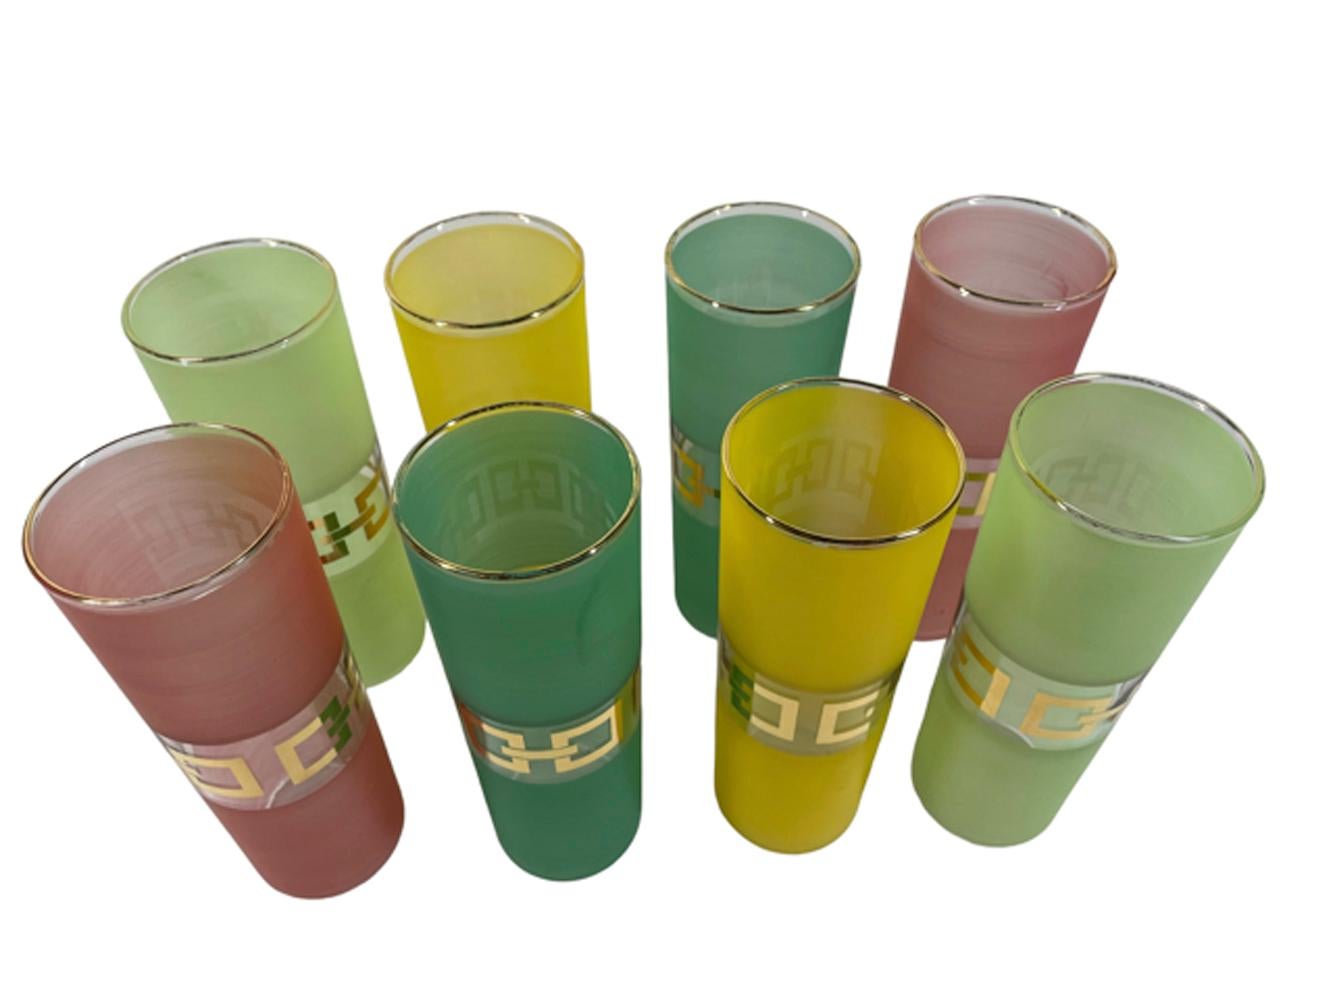 Set of eight Mid-twentieth century Tom Collins glasses, two each of four colors, lime, yellow, teal and red. Each glass frosted top and bottom with a central band left clear, which is then decorated with 22 karat gold in a stylized chain-link